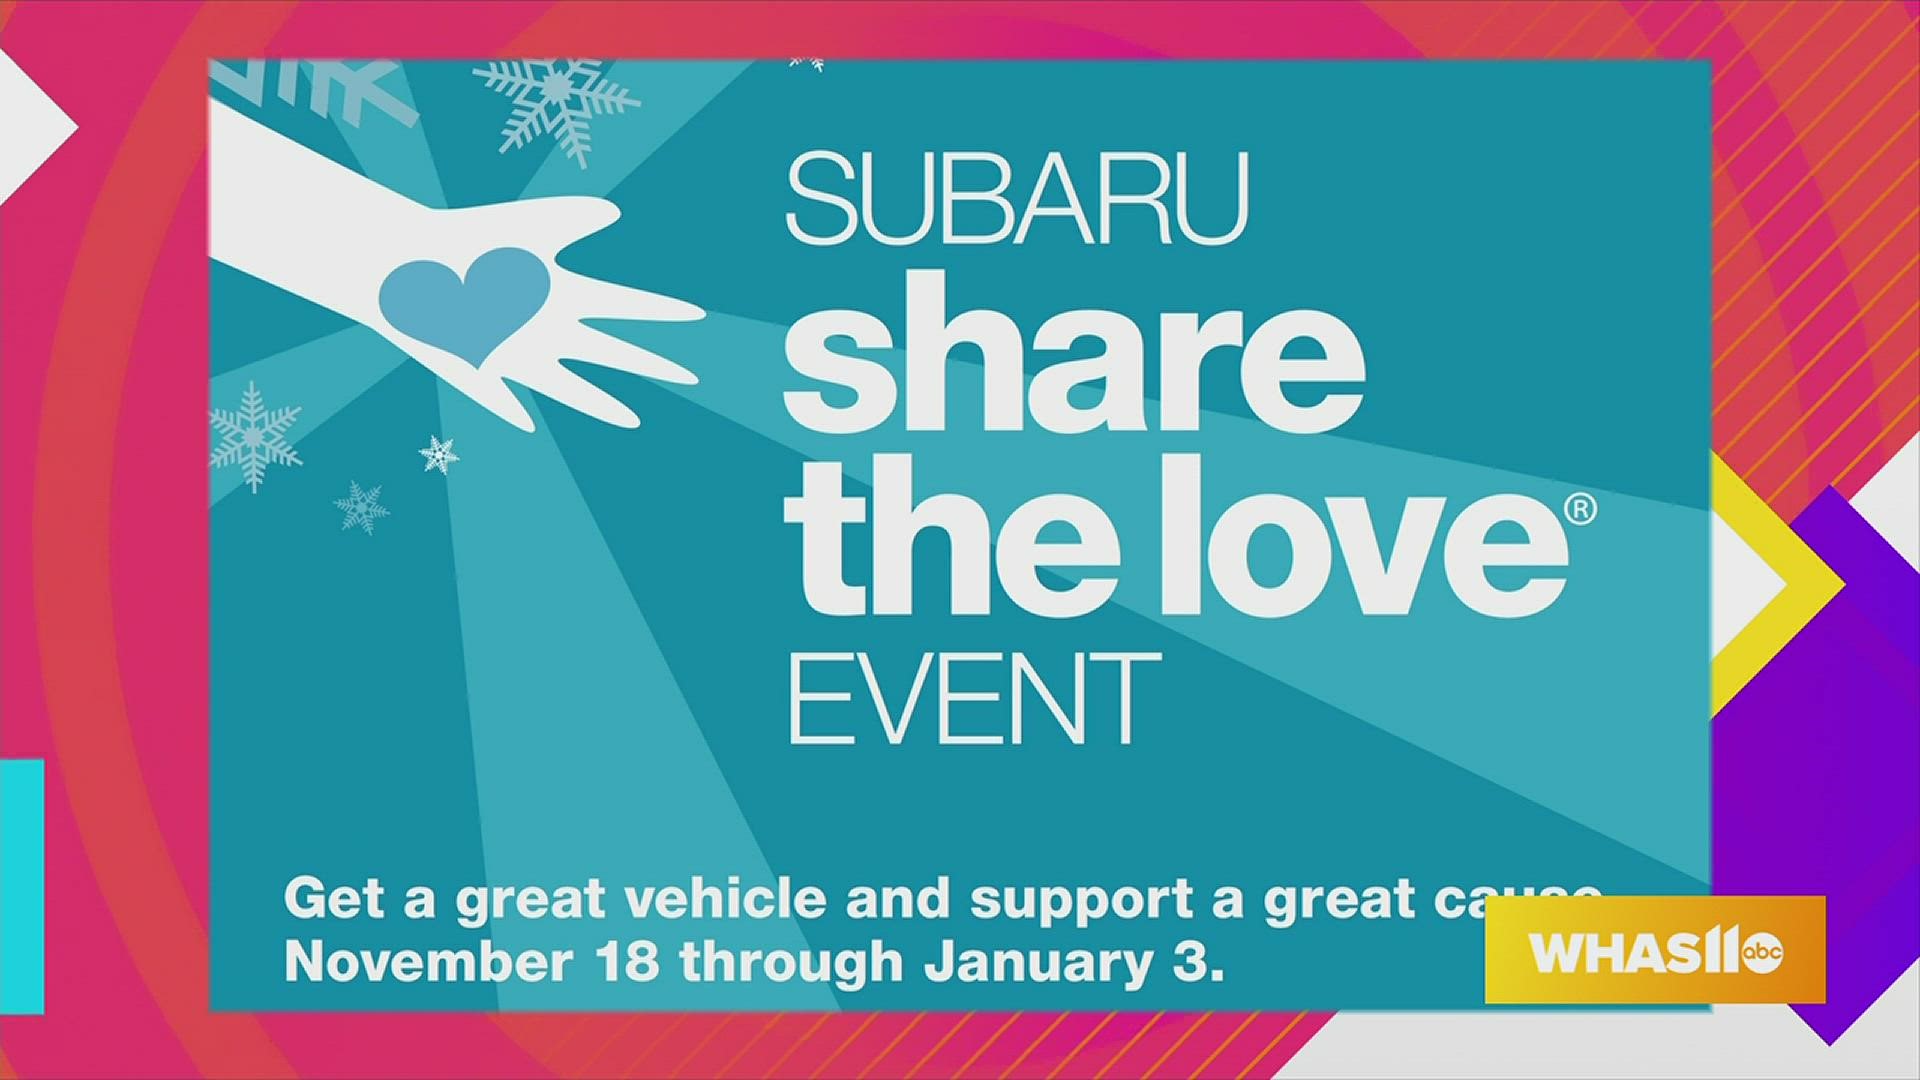 To learn more, visit NeilHuffmanSubaru.com and Maryhurst.org.